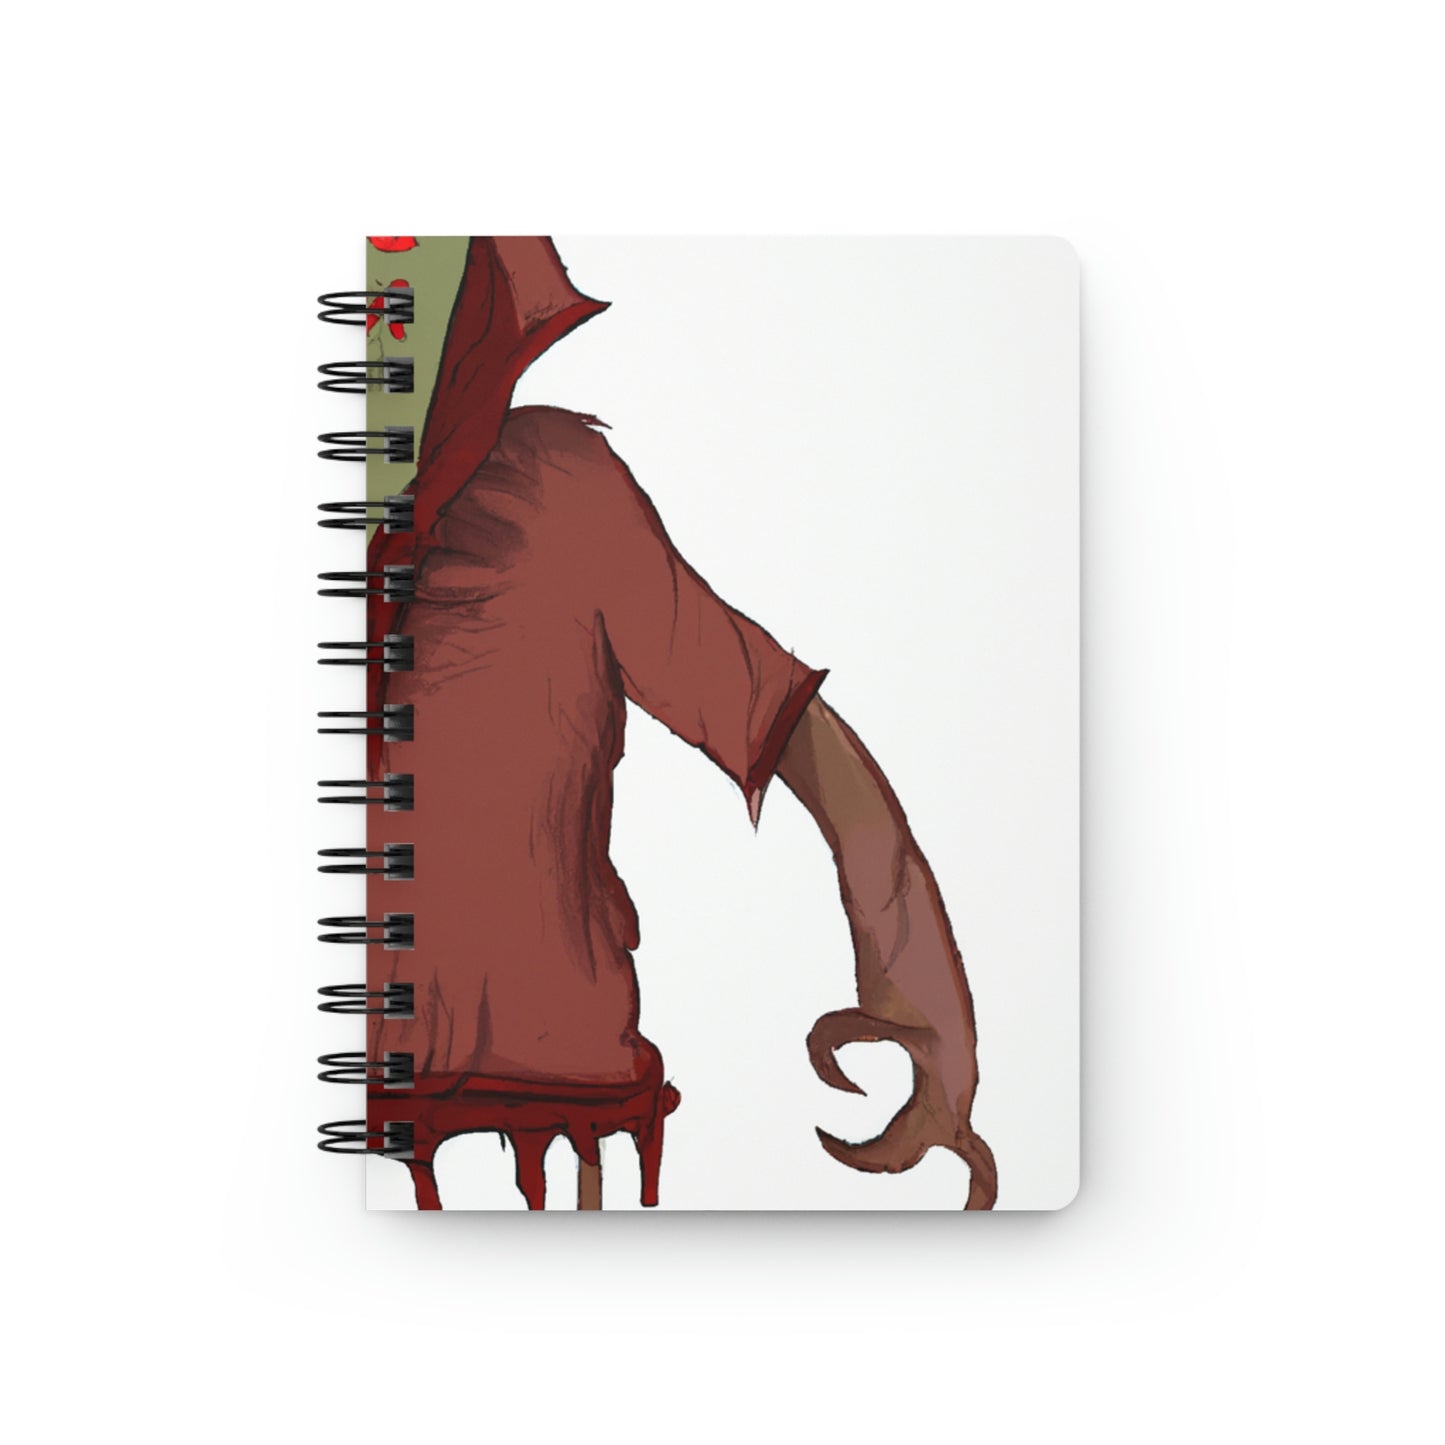 The Spectral Skin Fitting - The Alien Spiral Bound Journal